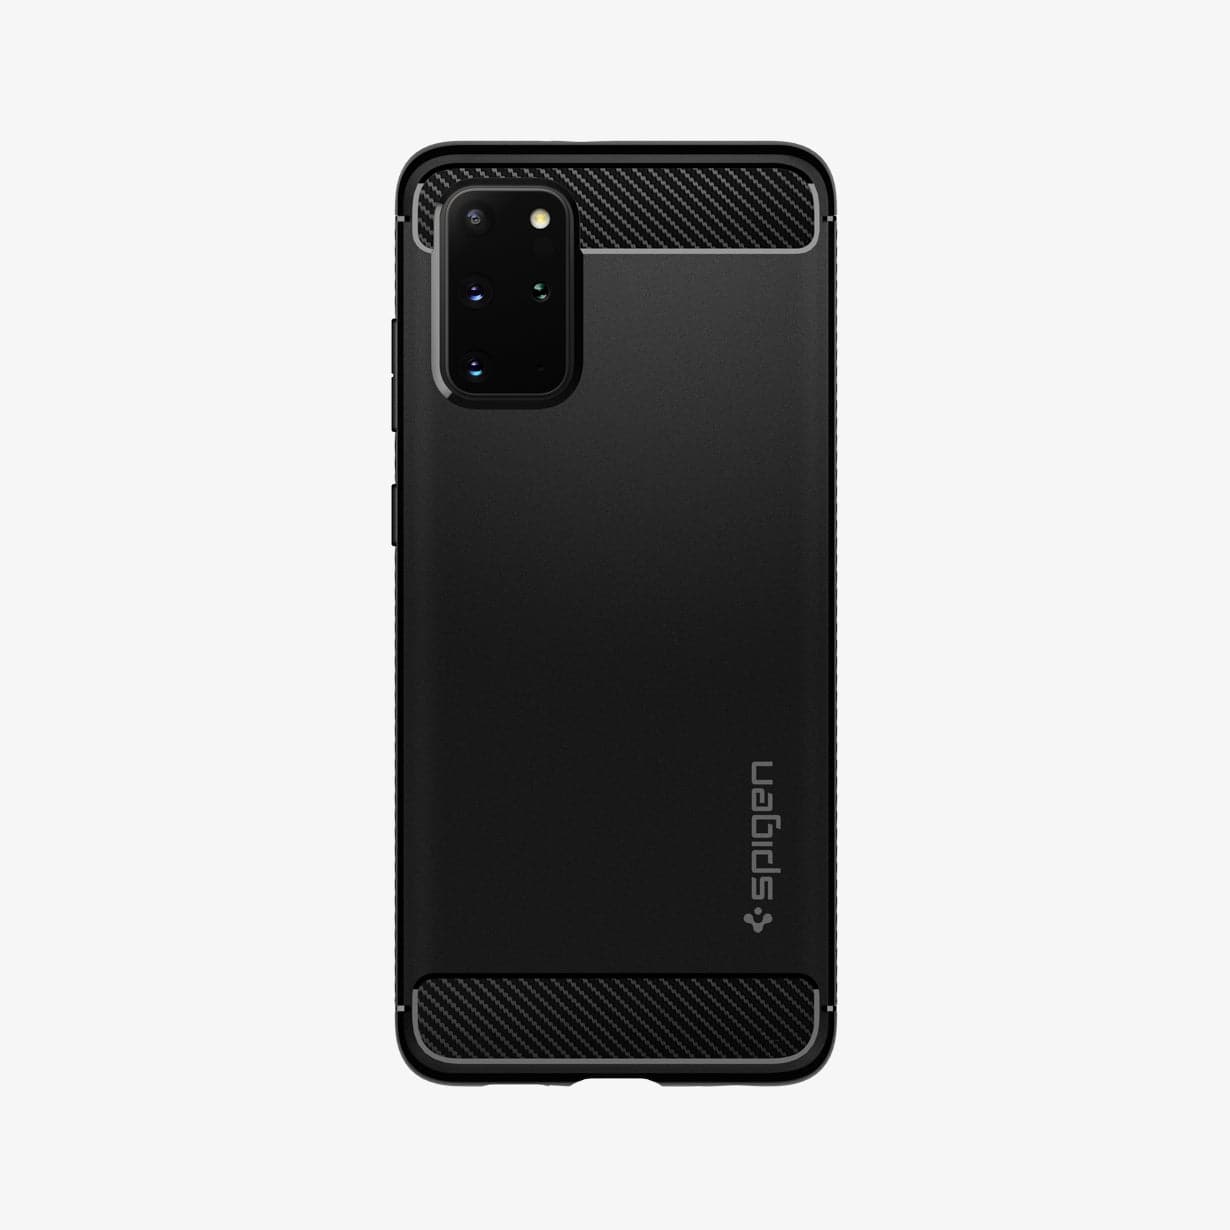 ACS00753 - Galaxy S20 Plus Rugged Armor Case in black showing the back